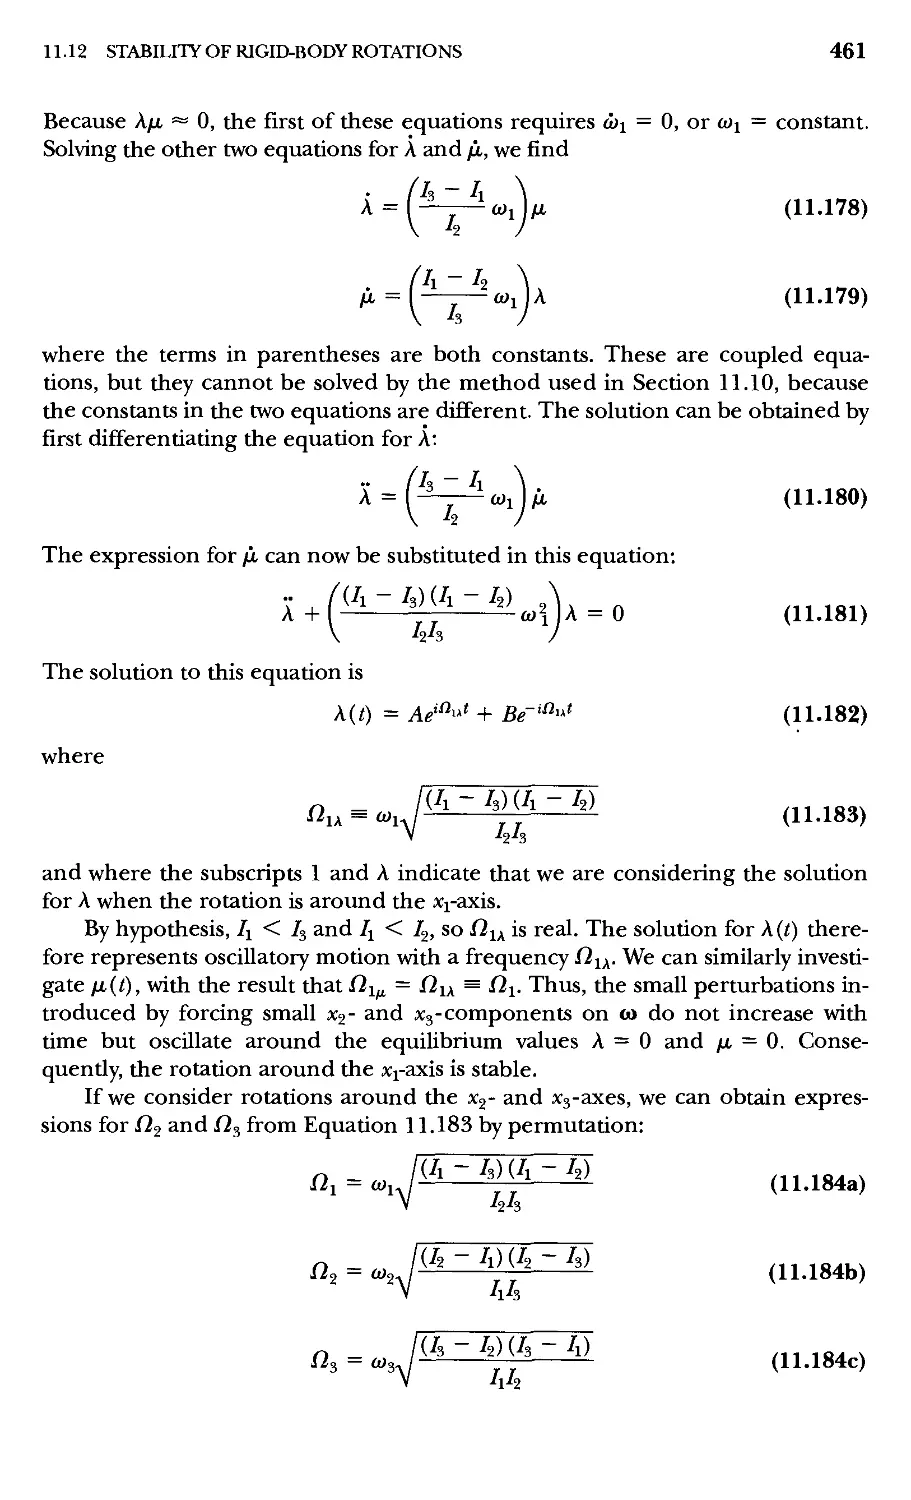 12.4 General Problem of Coupled Oscillations